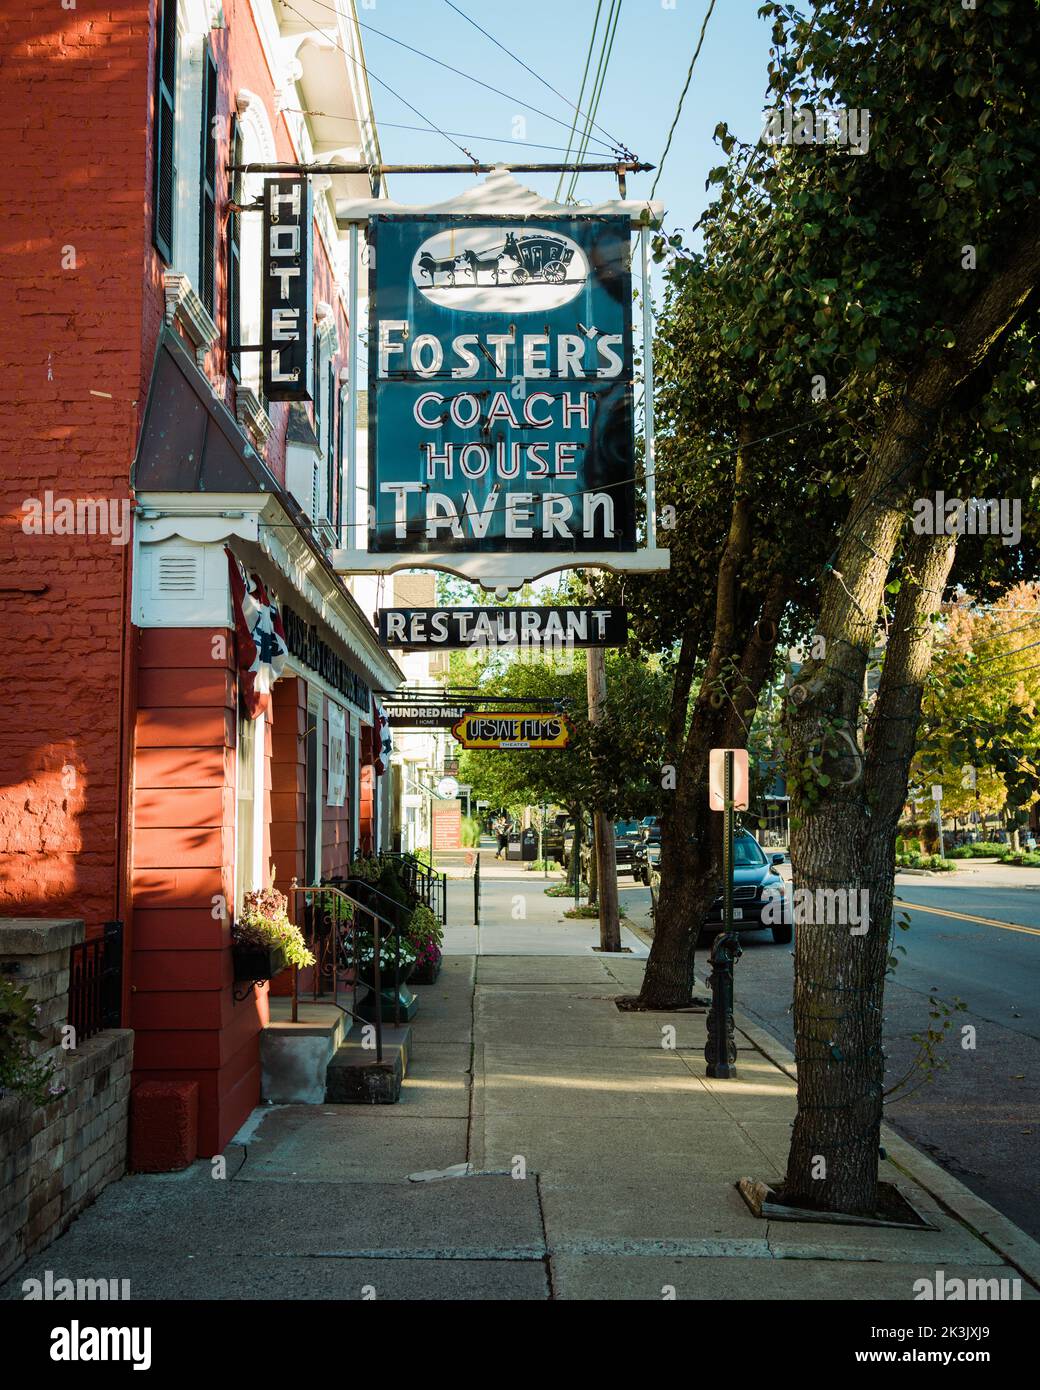 Fosters Coach House vintage sign, Rhinebeck, New York Stock Photo